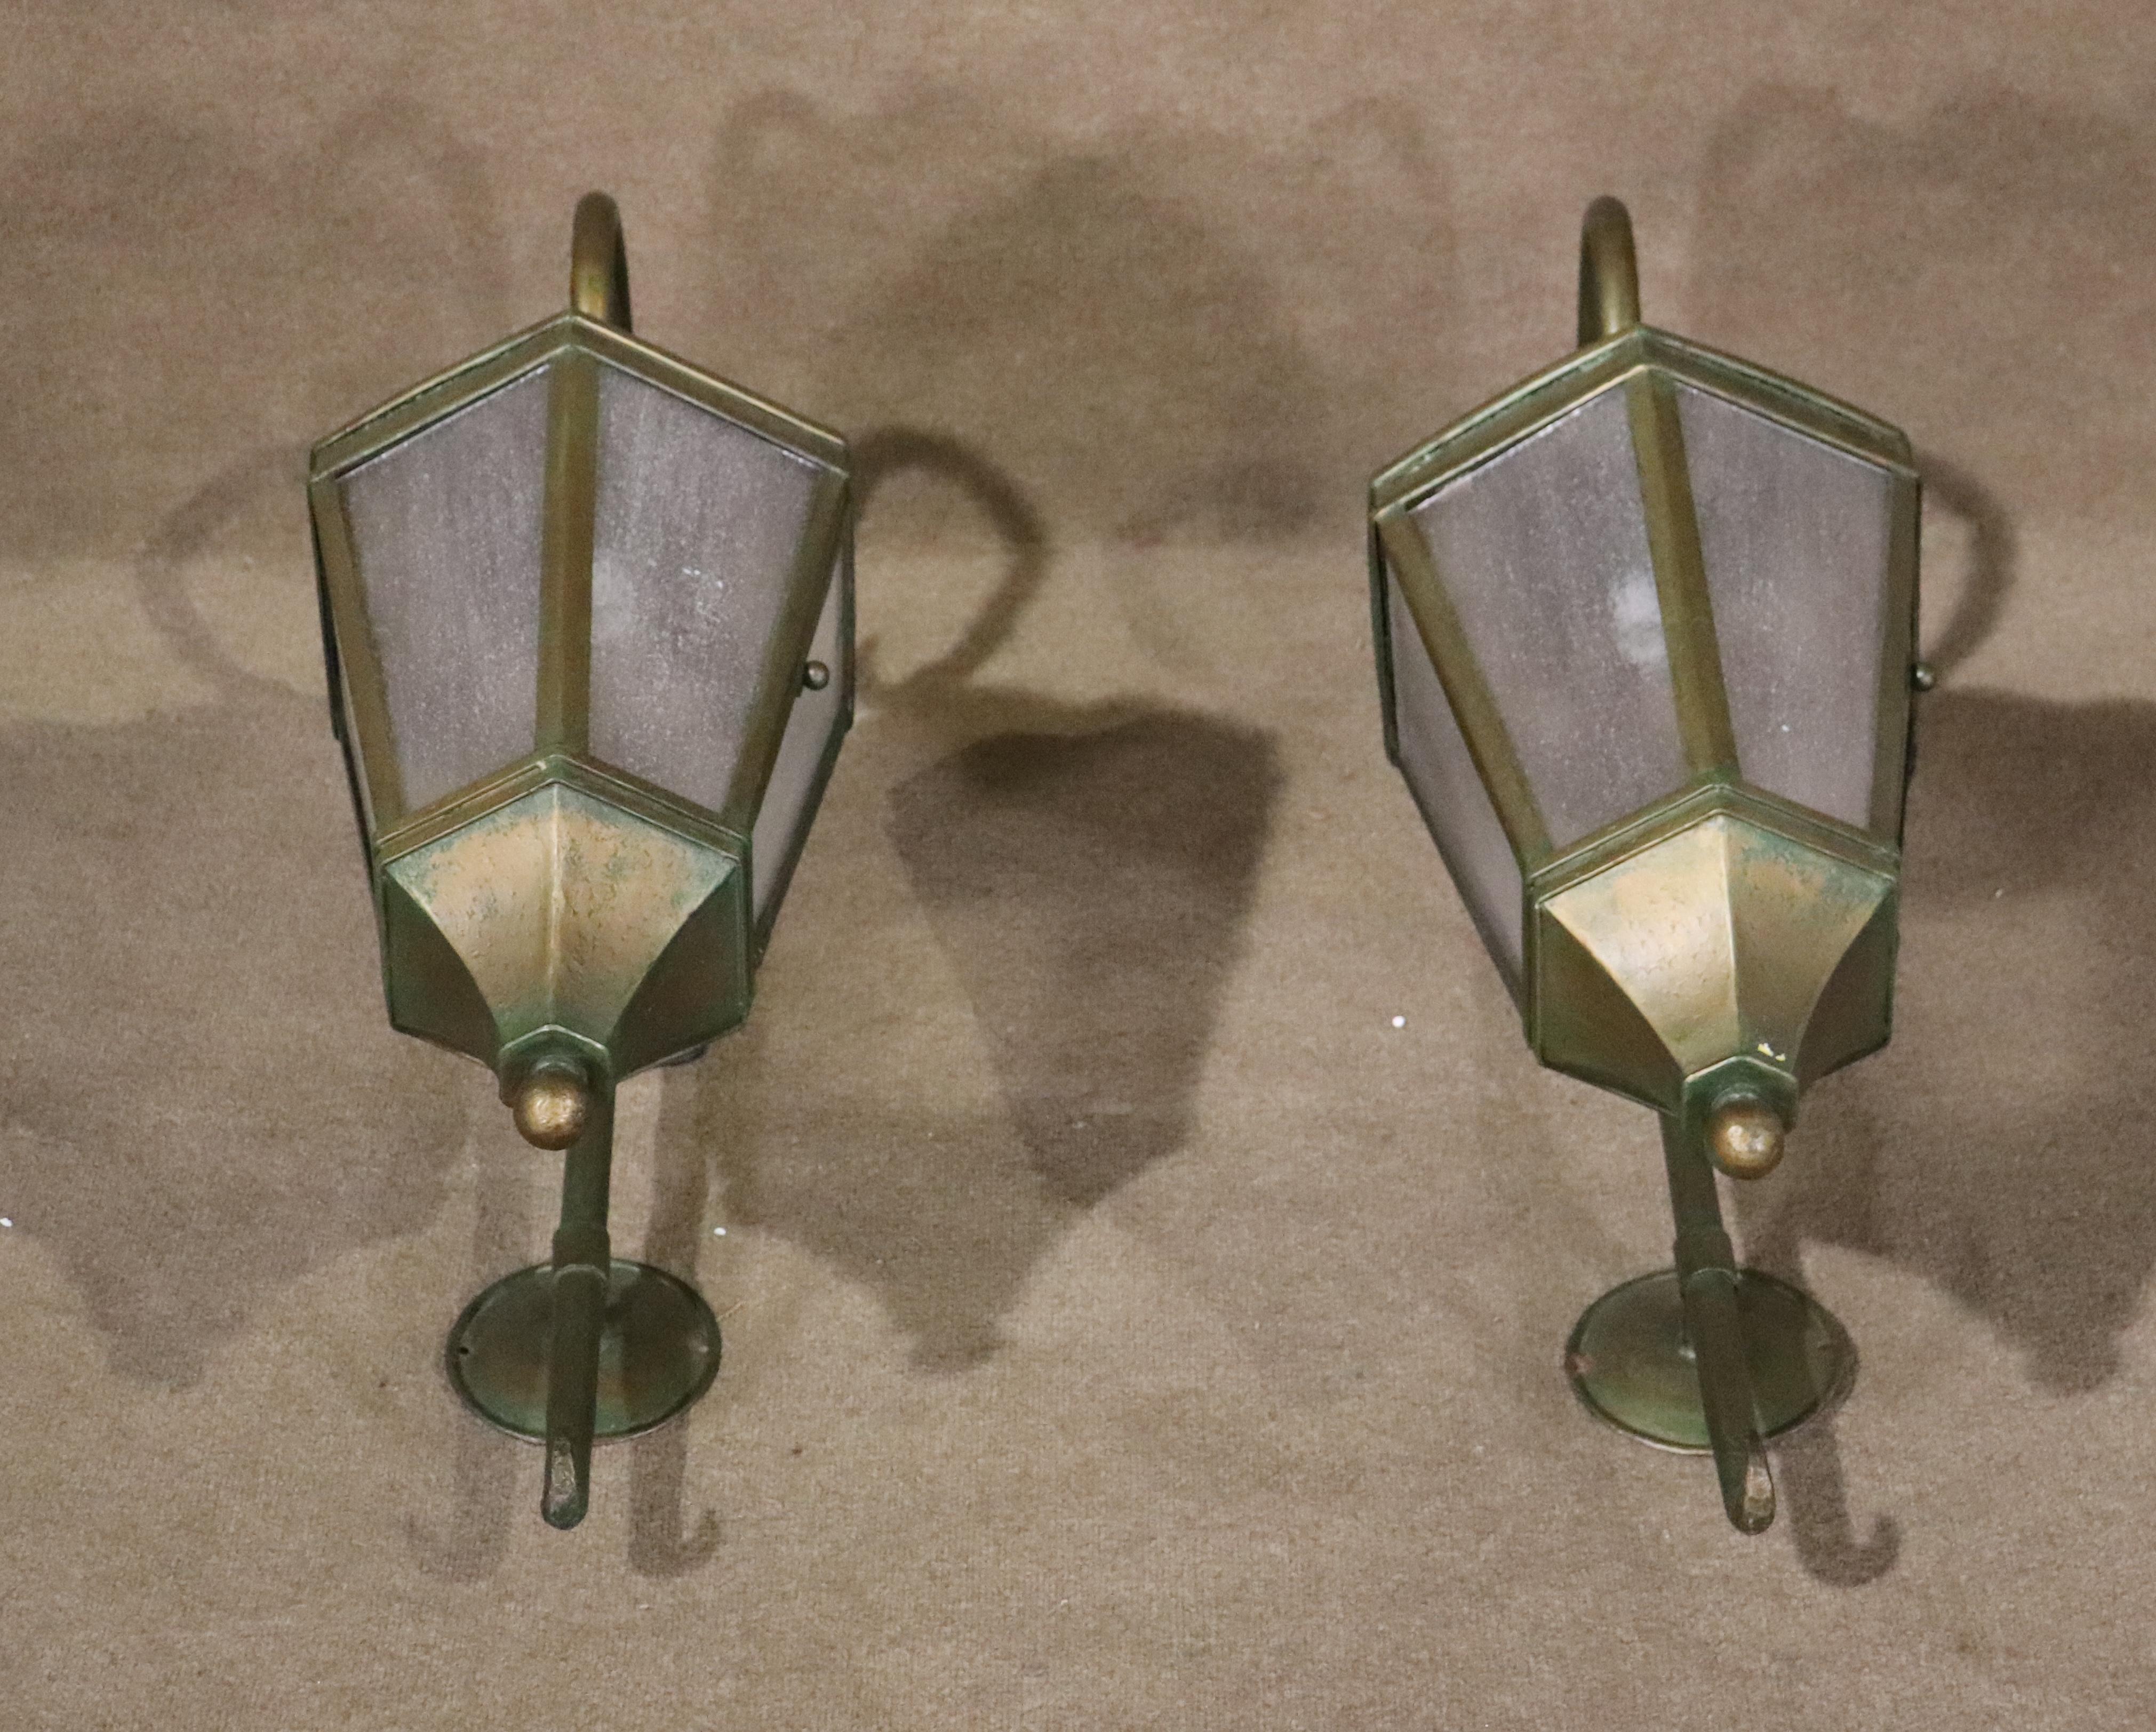 Pair of vintage metal outdoor sconces with glass. Over three feet tall, with handsome age and patina. Ready to light your home entrance!
Please confirm location NY or NJ